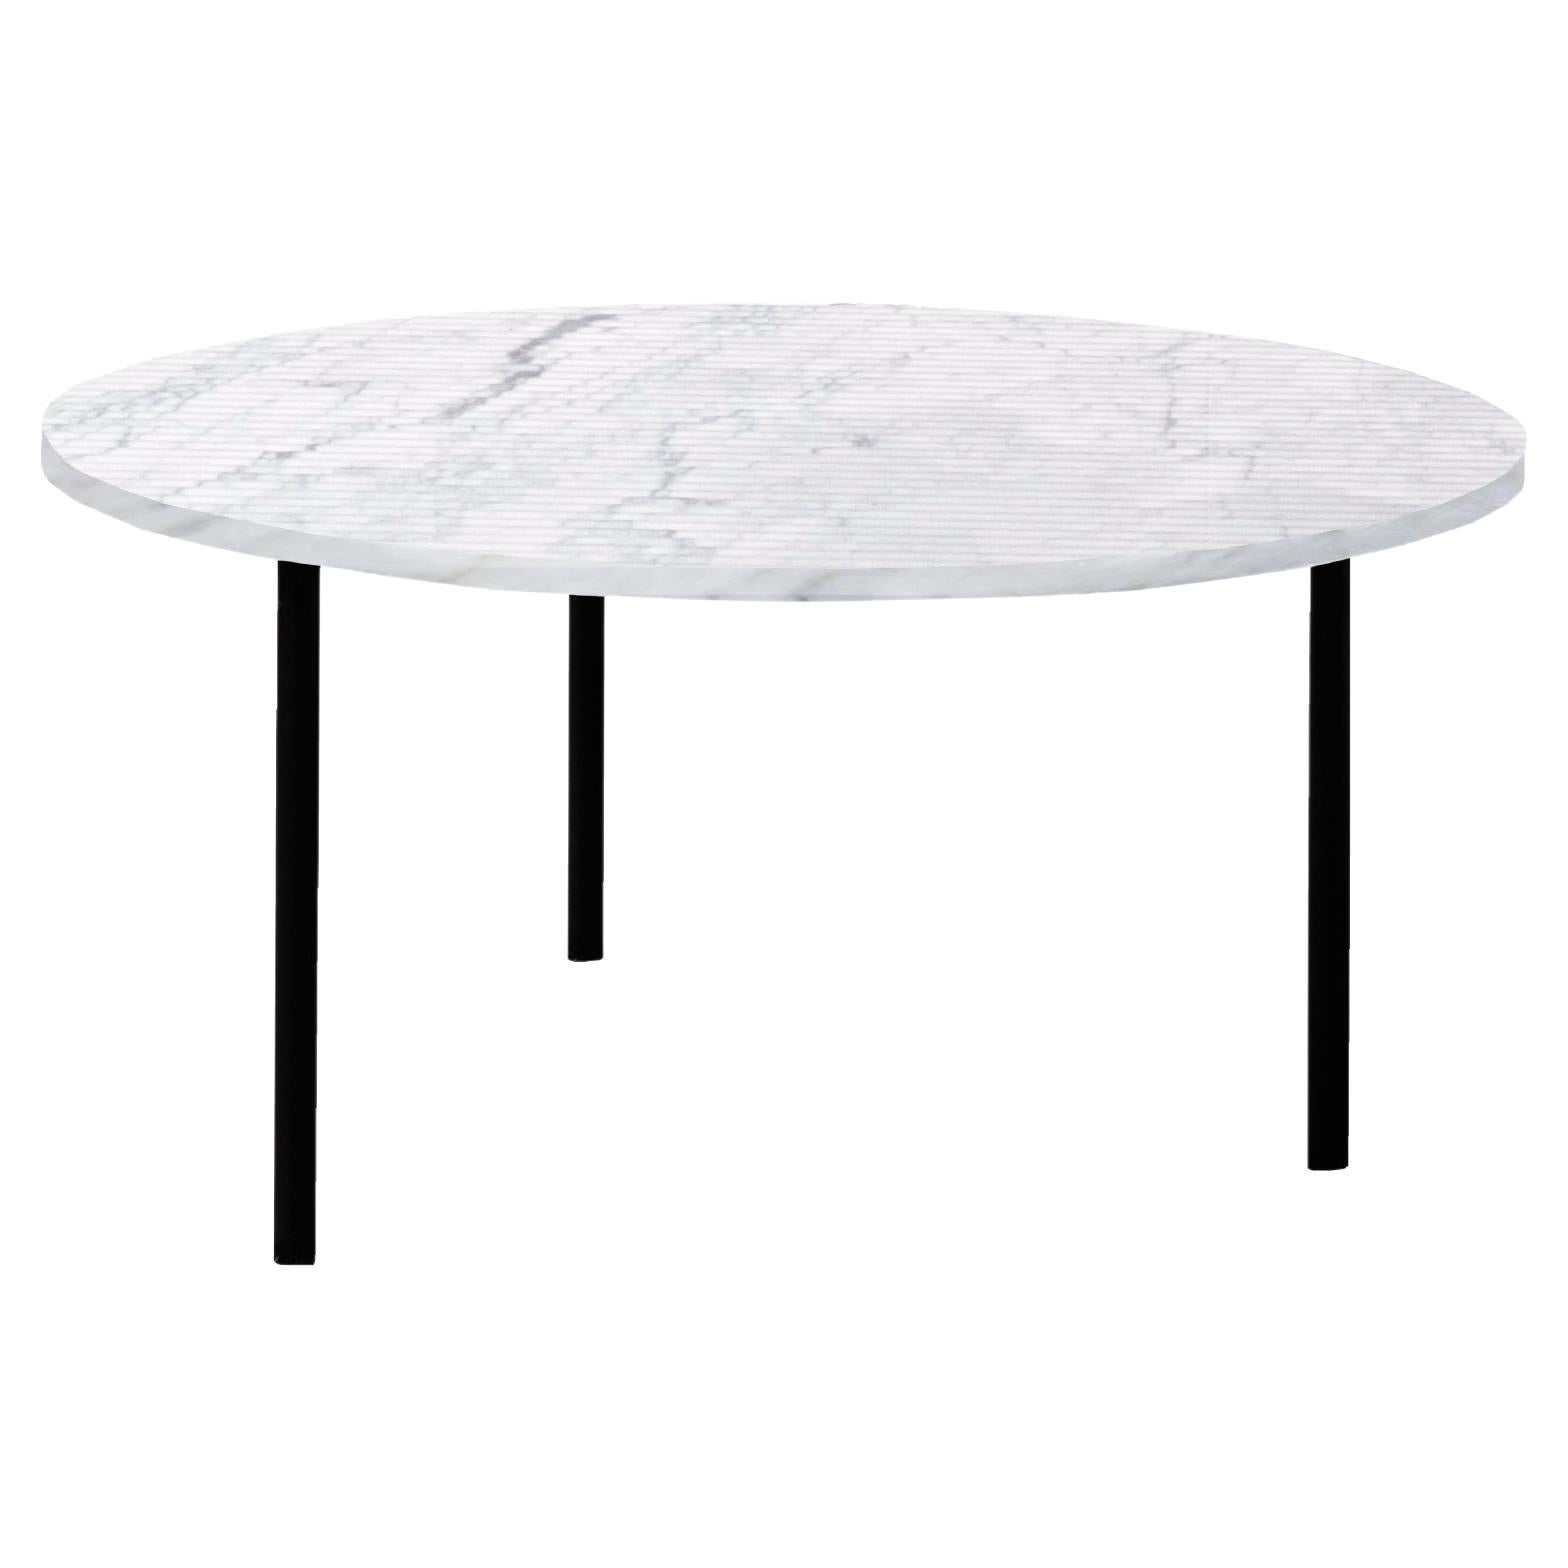 Gruff Grooved Coffe Table Medium For Sale